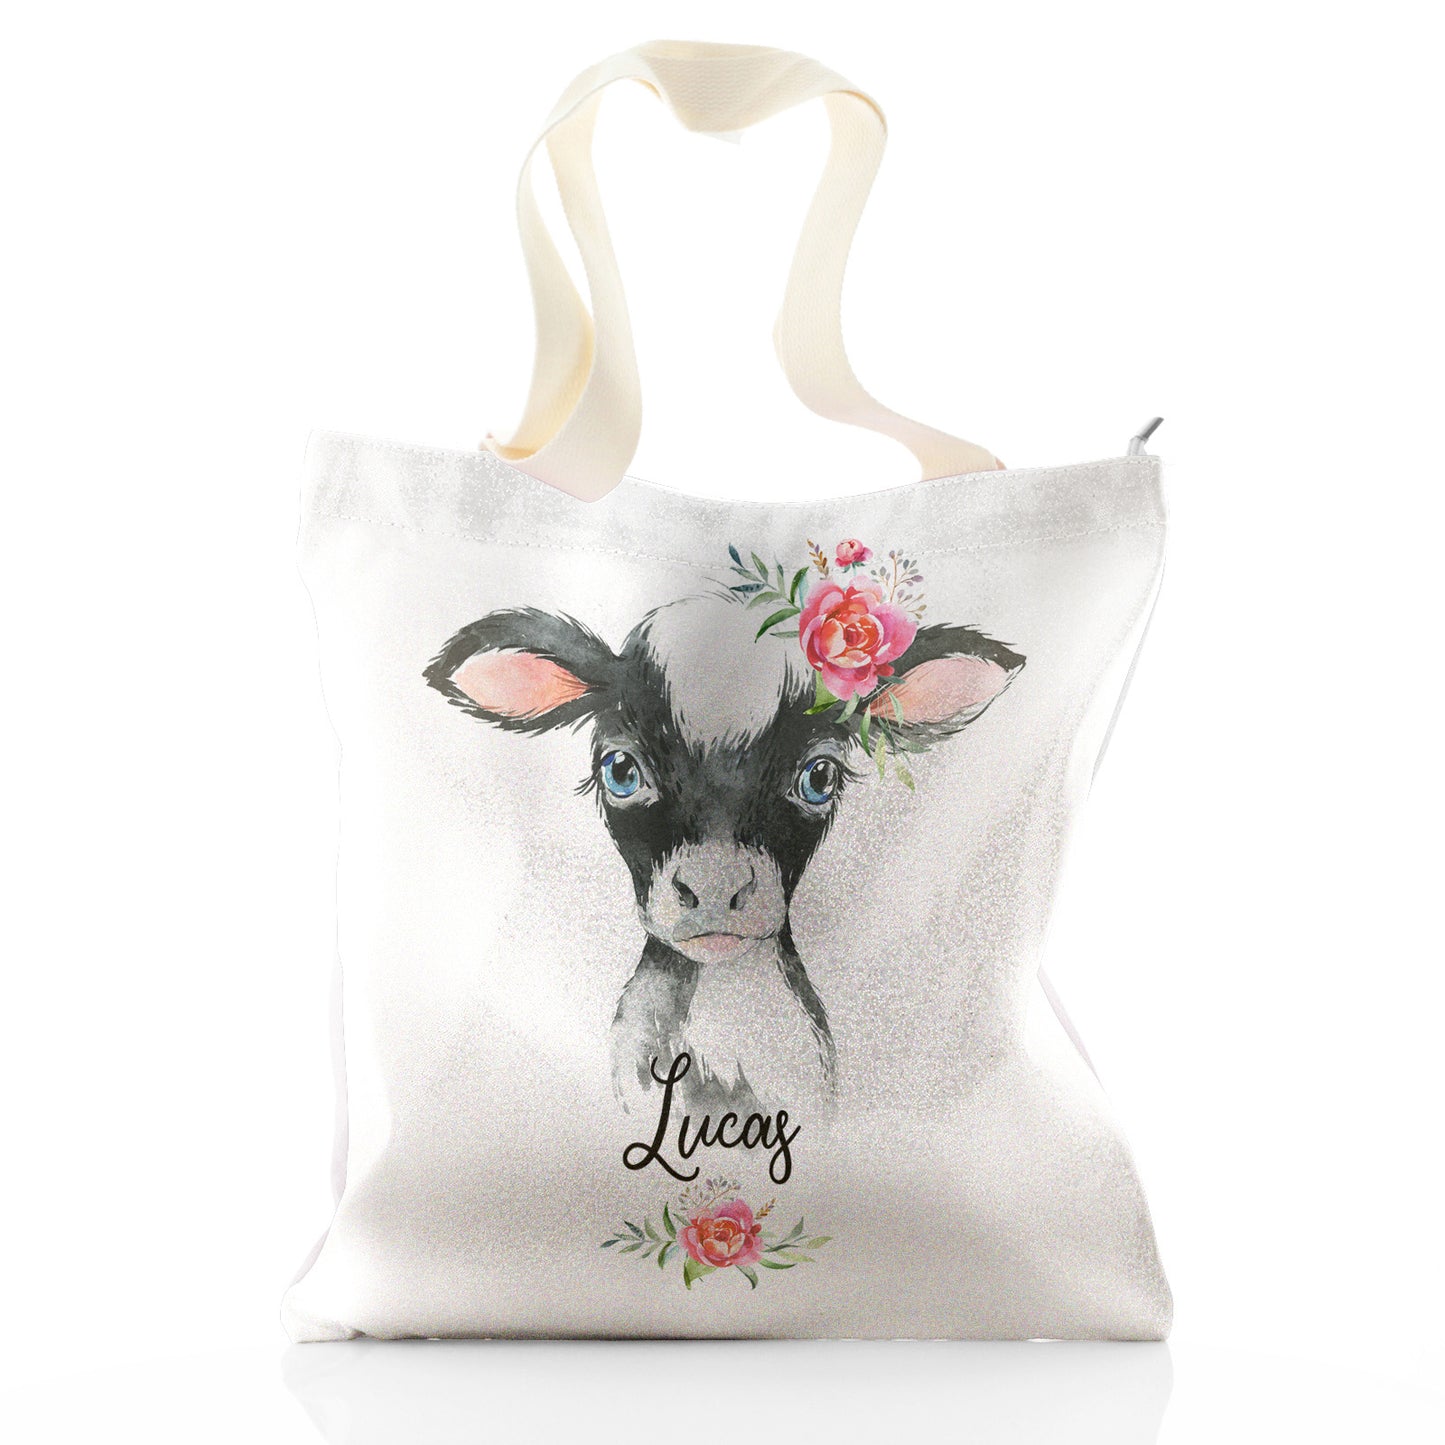 Personalised Glitter Tote Bag with Black and White Cow Pink Rose Flowers and Cute Text